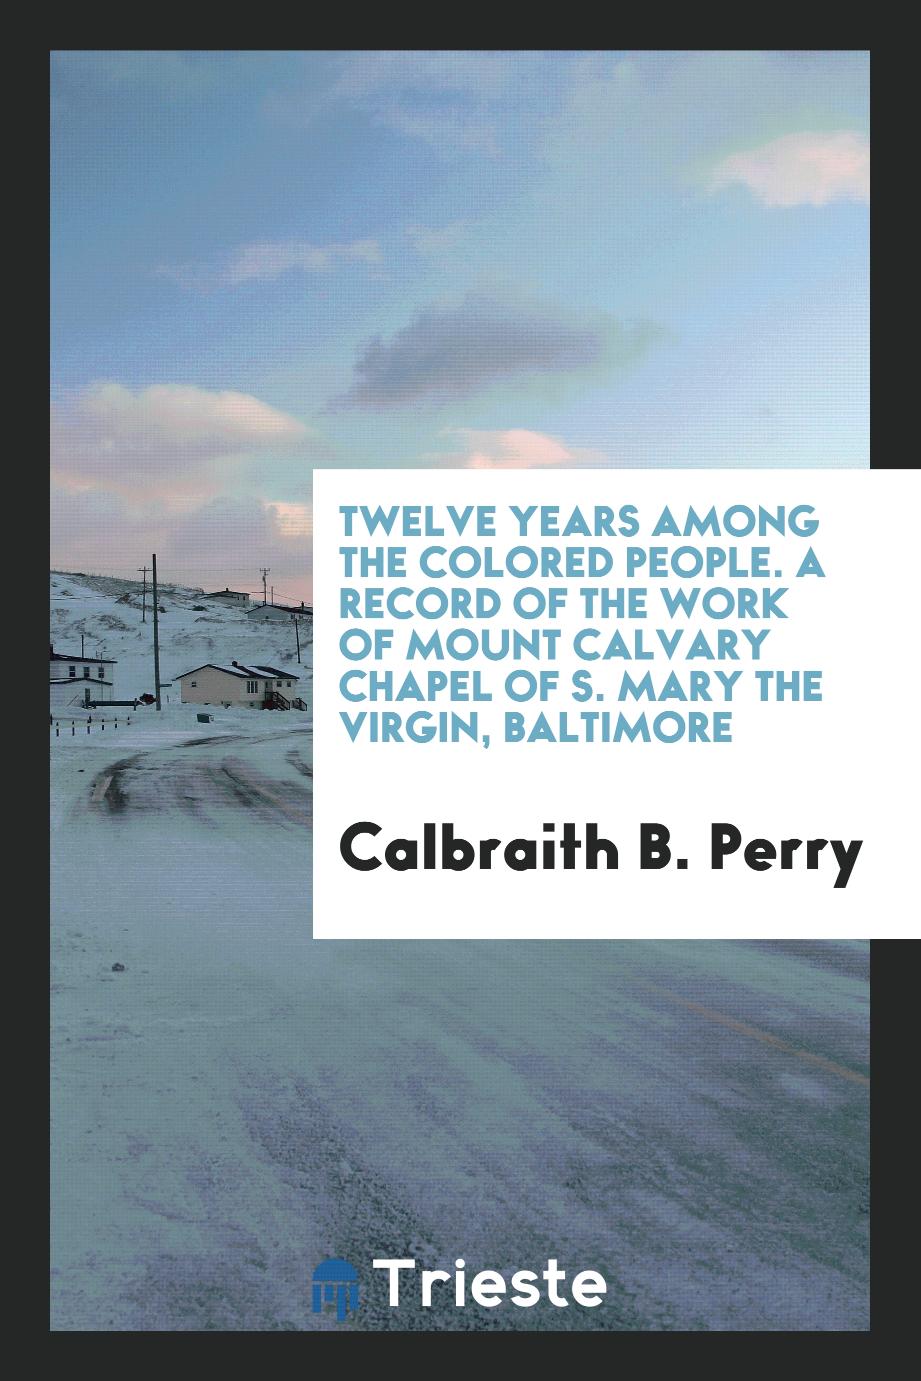 Twelve Years Among the Colored People. A Record of the Work of Mount Calvary Chapel of S. Mary the Virgin, Baltimore